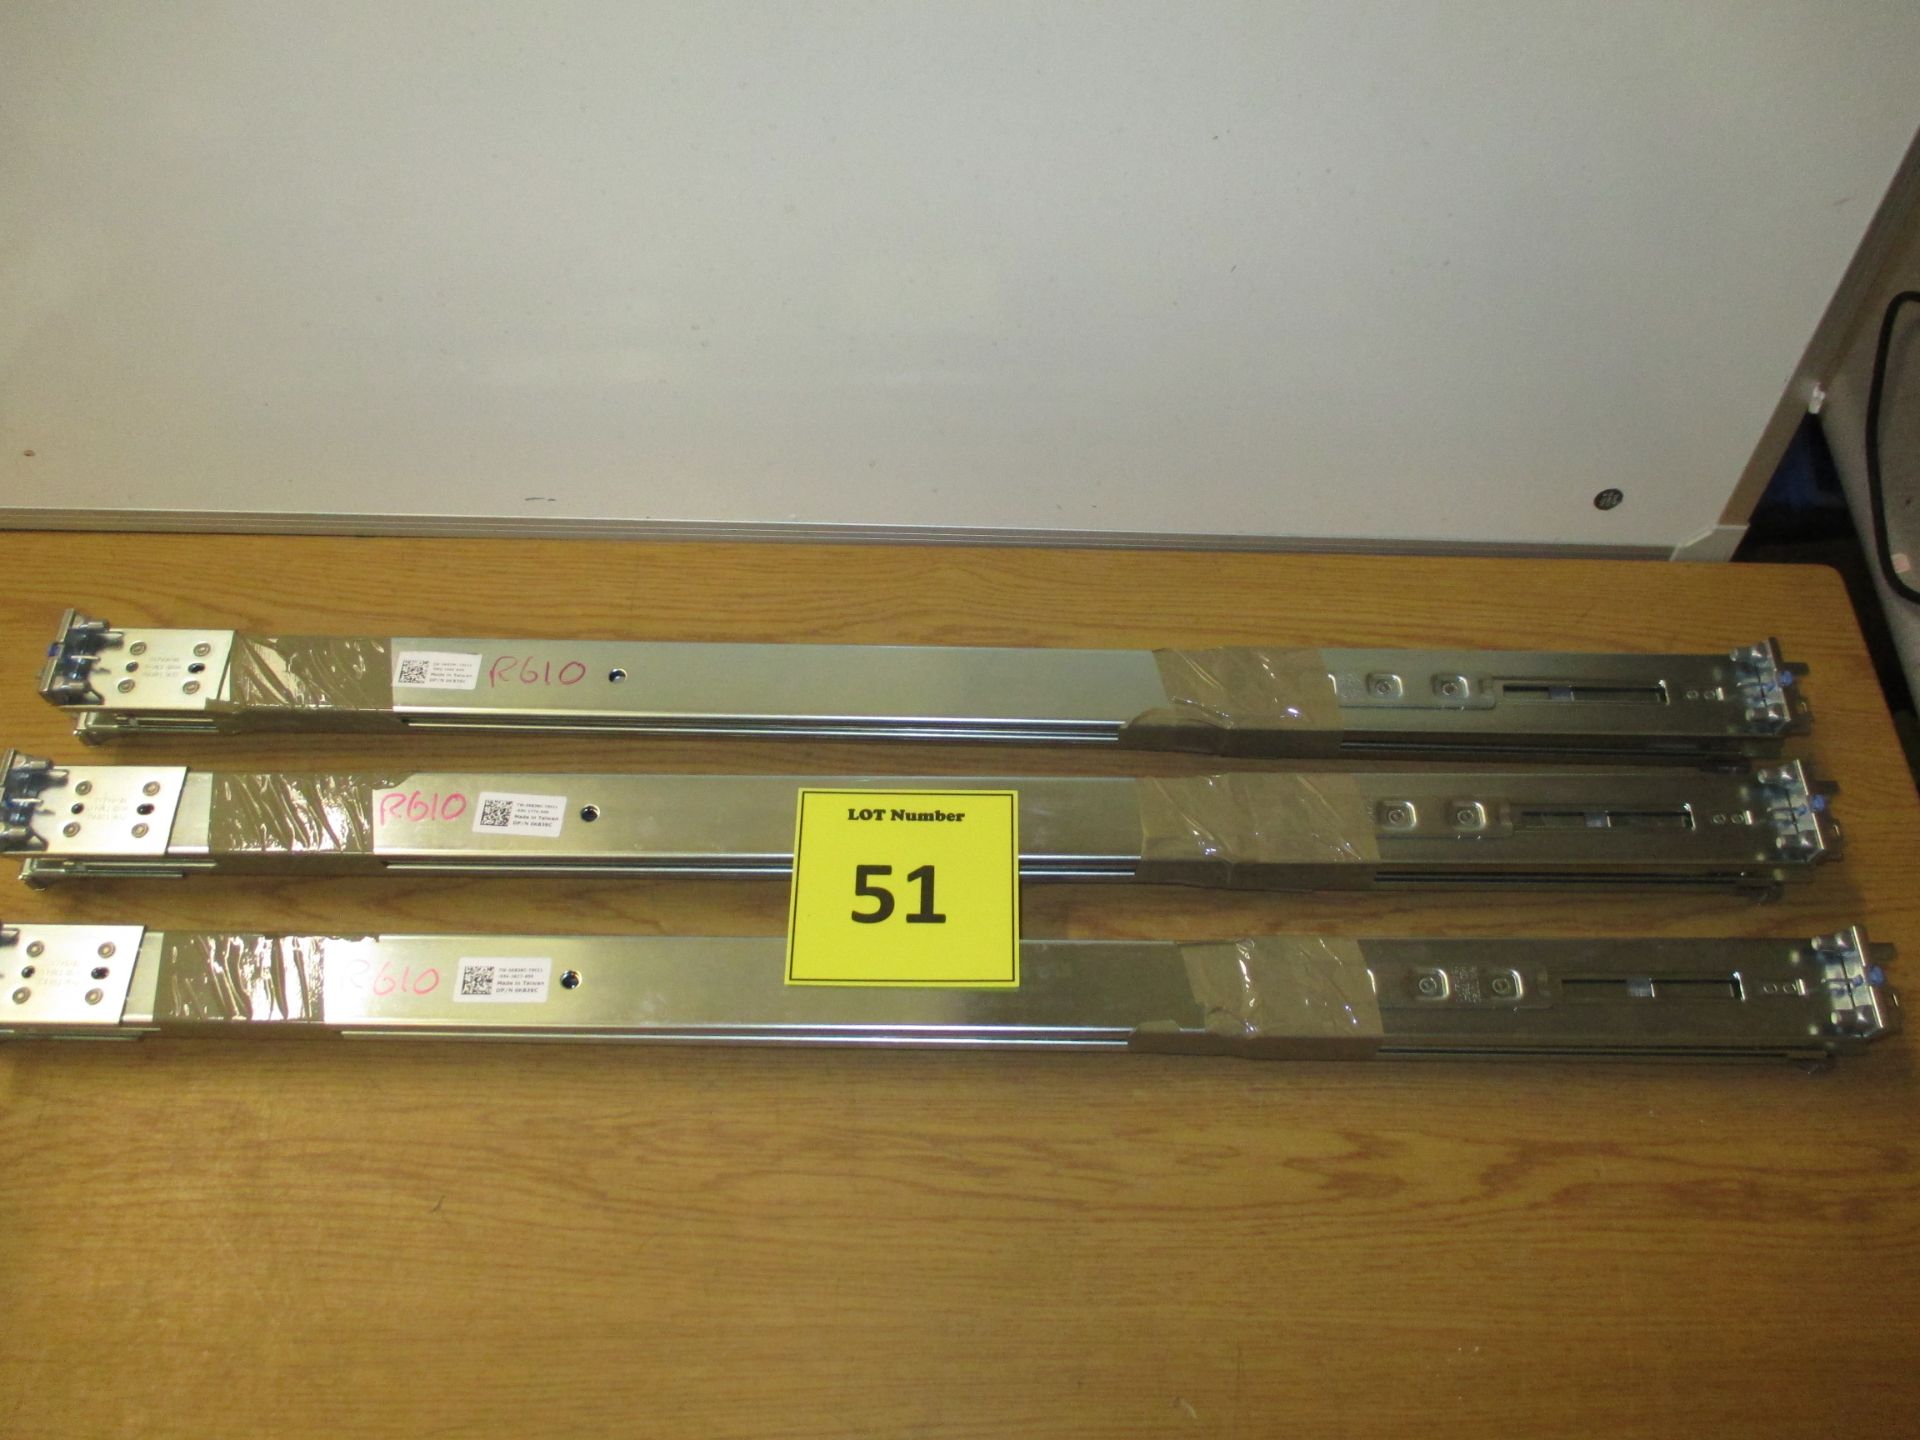 3 x PAIRS OF RACKMOUNT RAILS FOR DELL R610 SERVERS